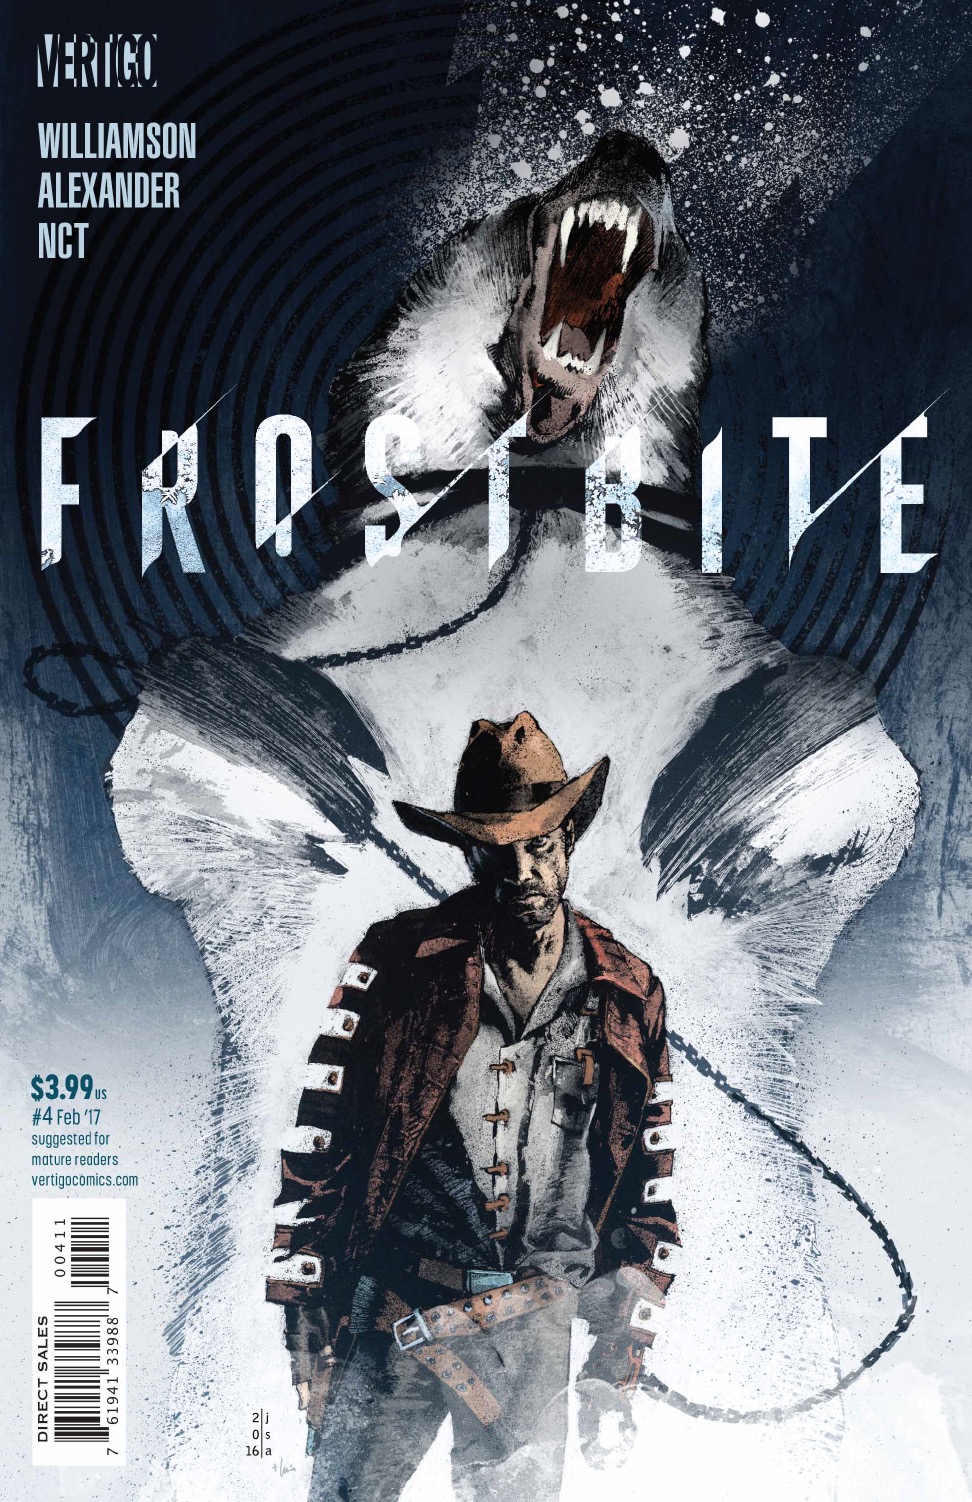 Frostbite #4 Review